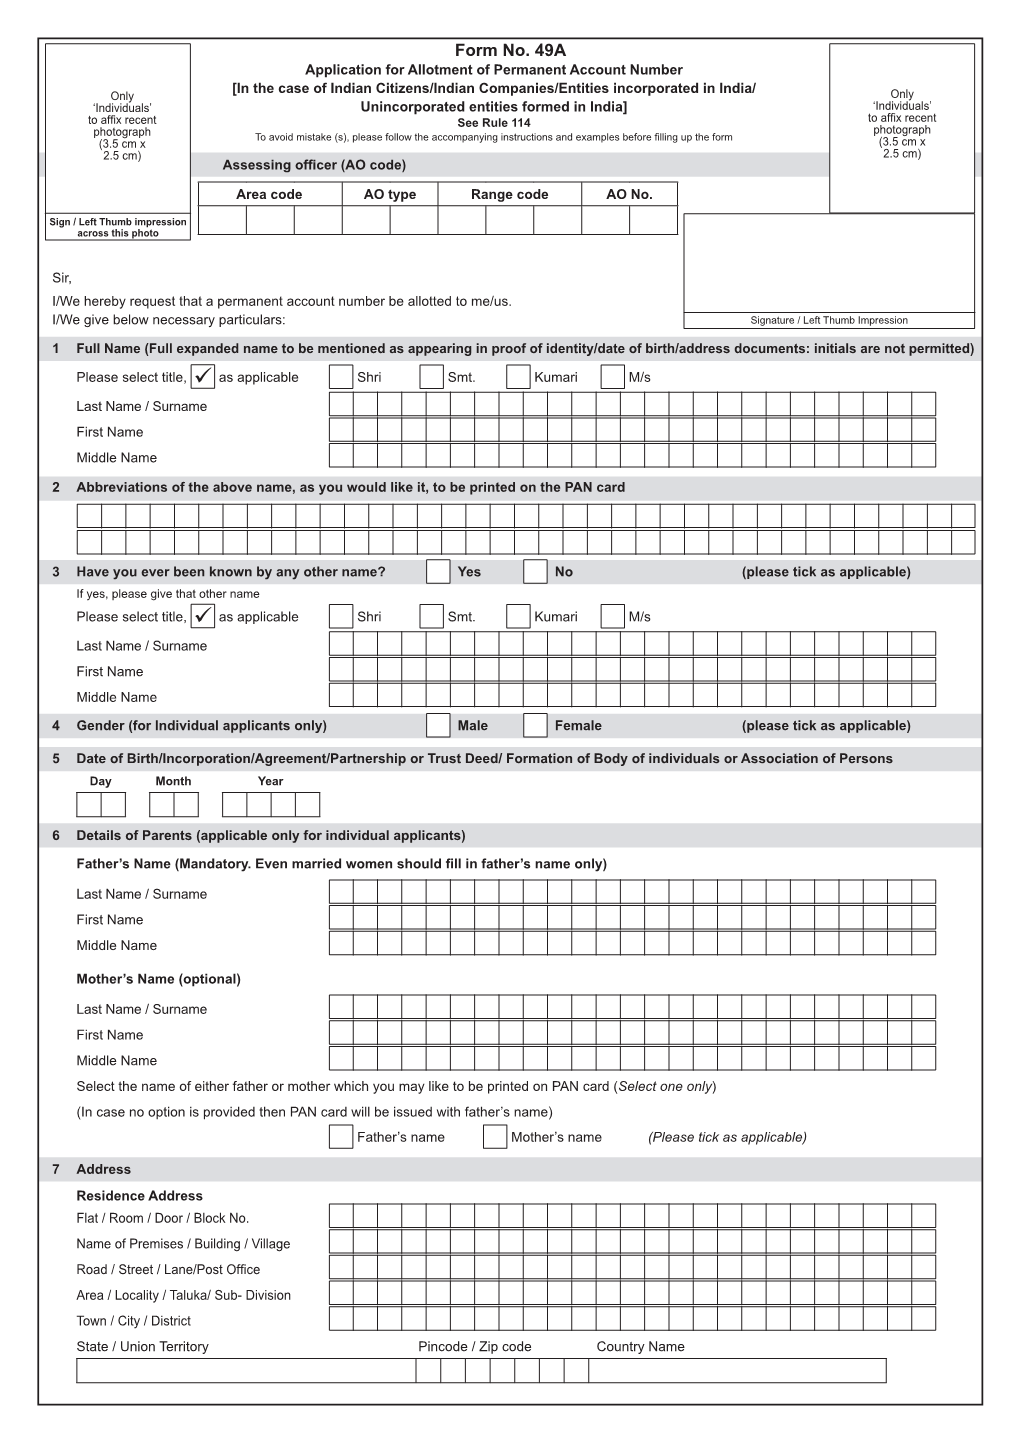 Form No. 49A Application for Allotment of Permanent Account Number